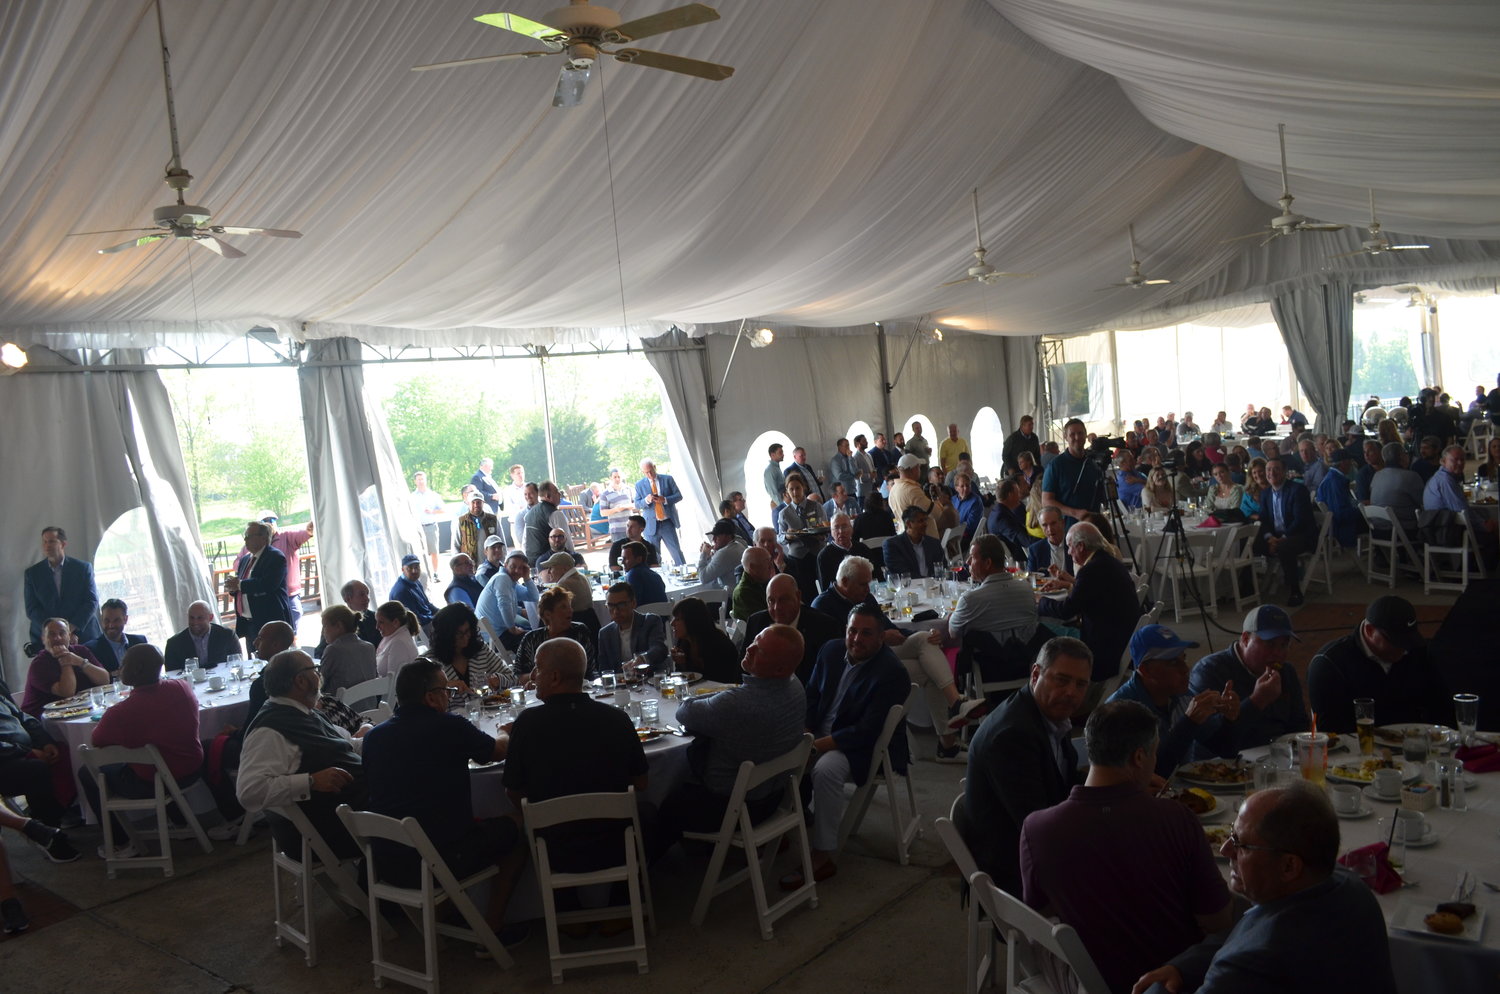 Hundreds of Mount Sinai supporters gathered to The Seawane Club in Hewlett Harbor.